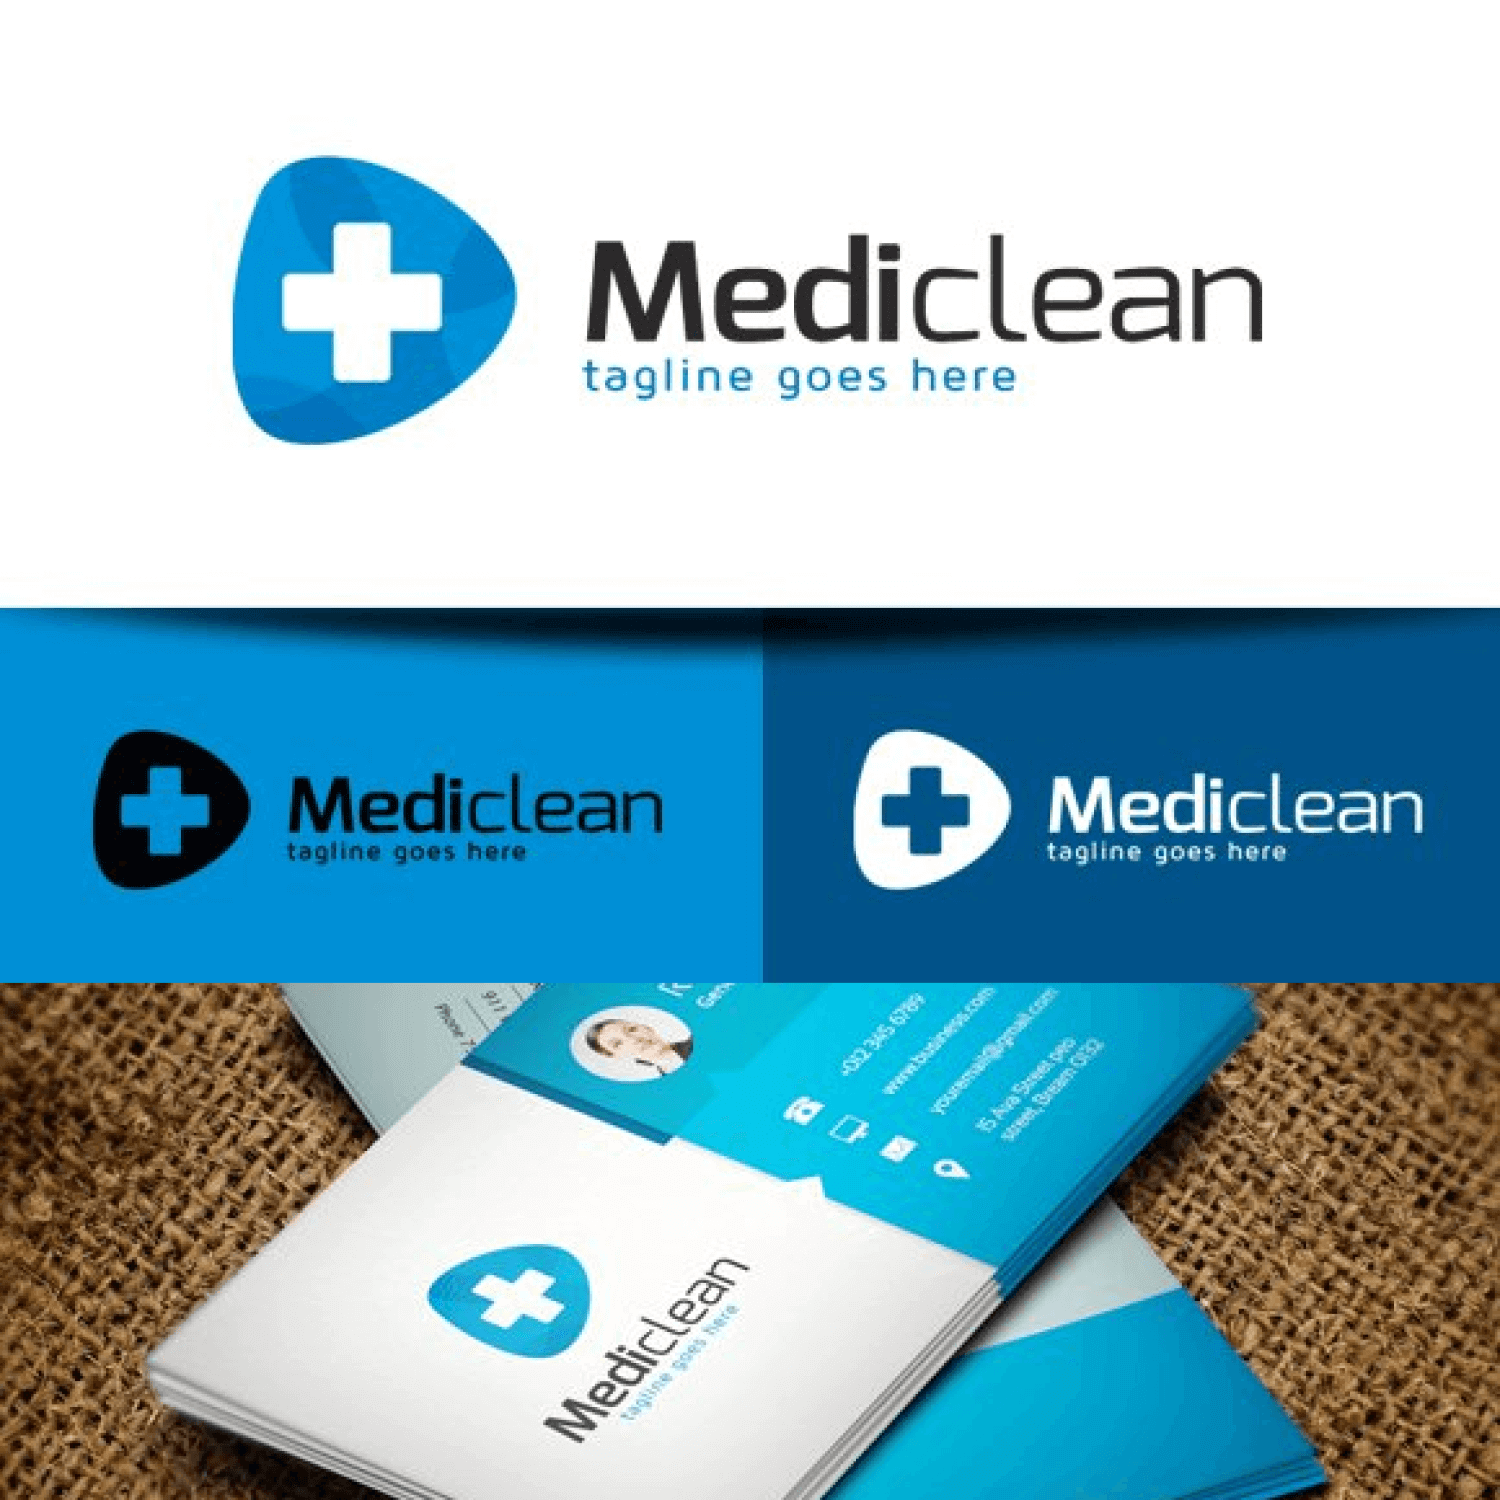 Blue and White Card of Mediclean.